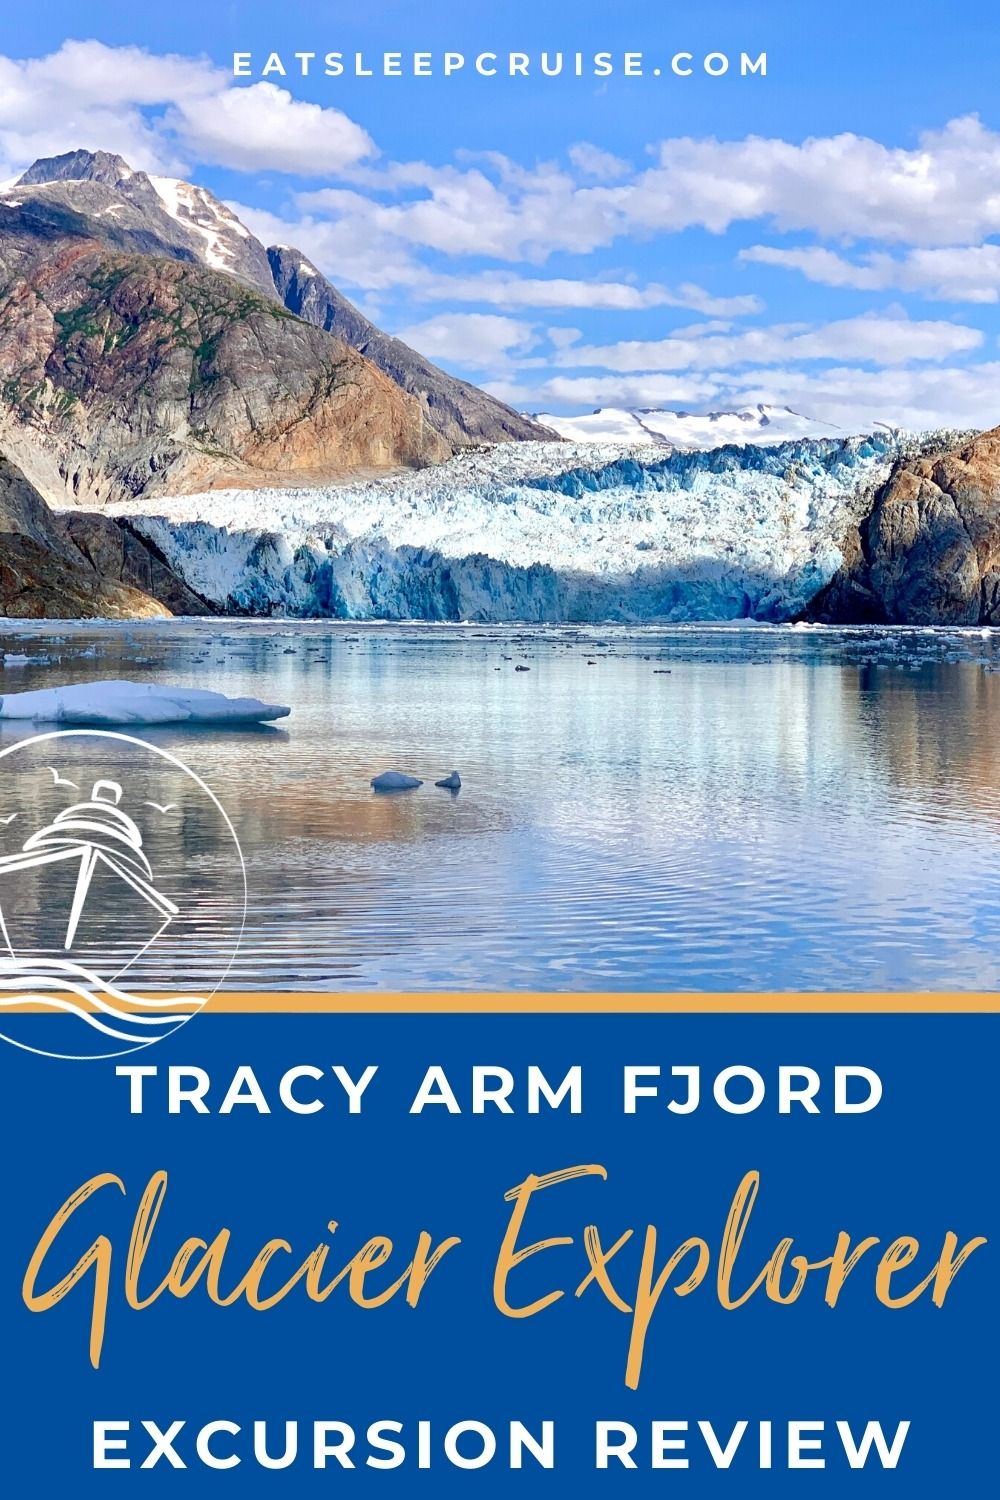 Tracy Arm Fjord and Glacier Explorer Excursion Review